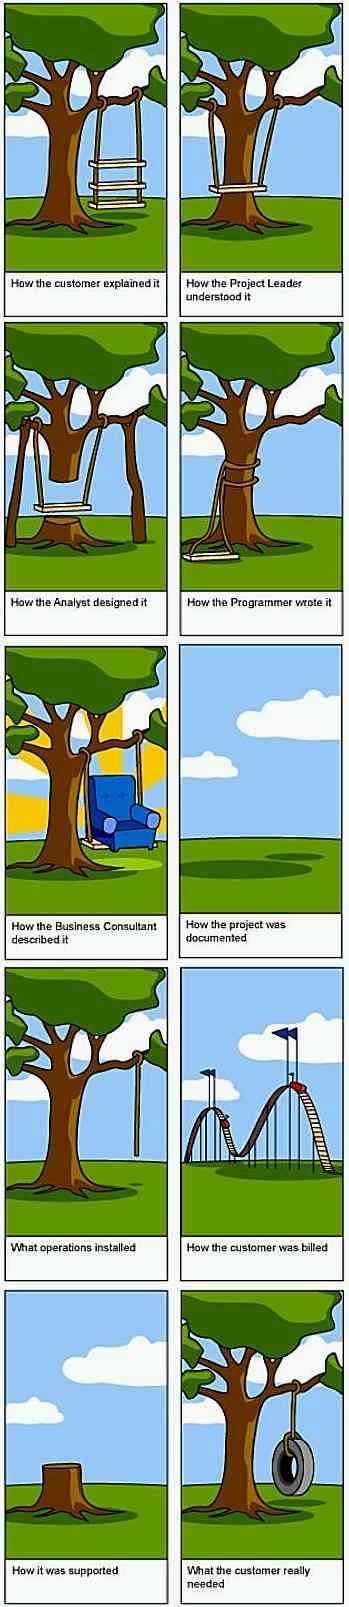 project management - what the customer really wanted